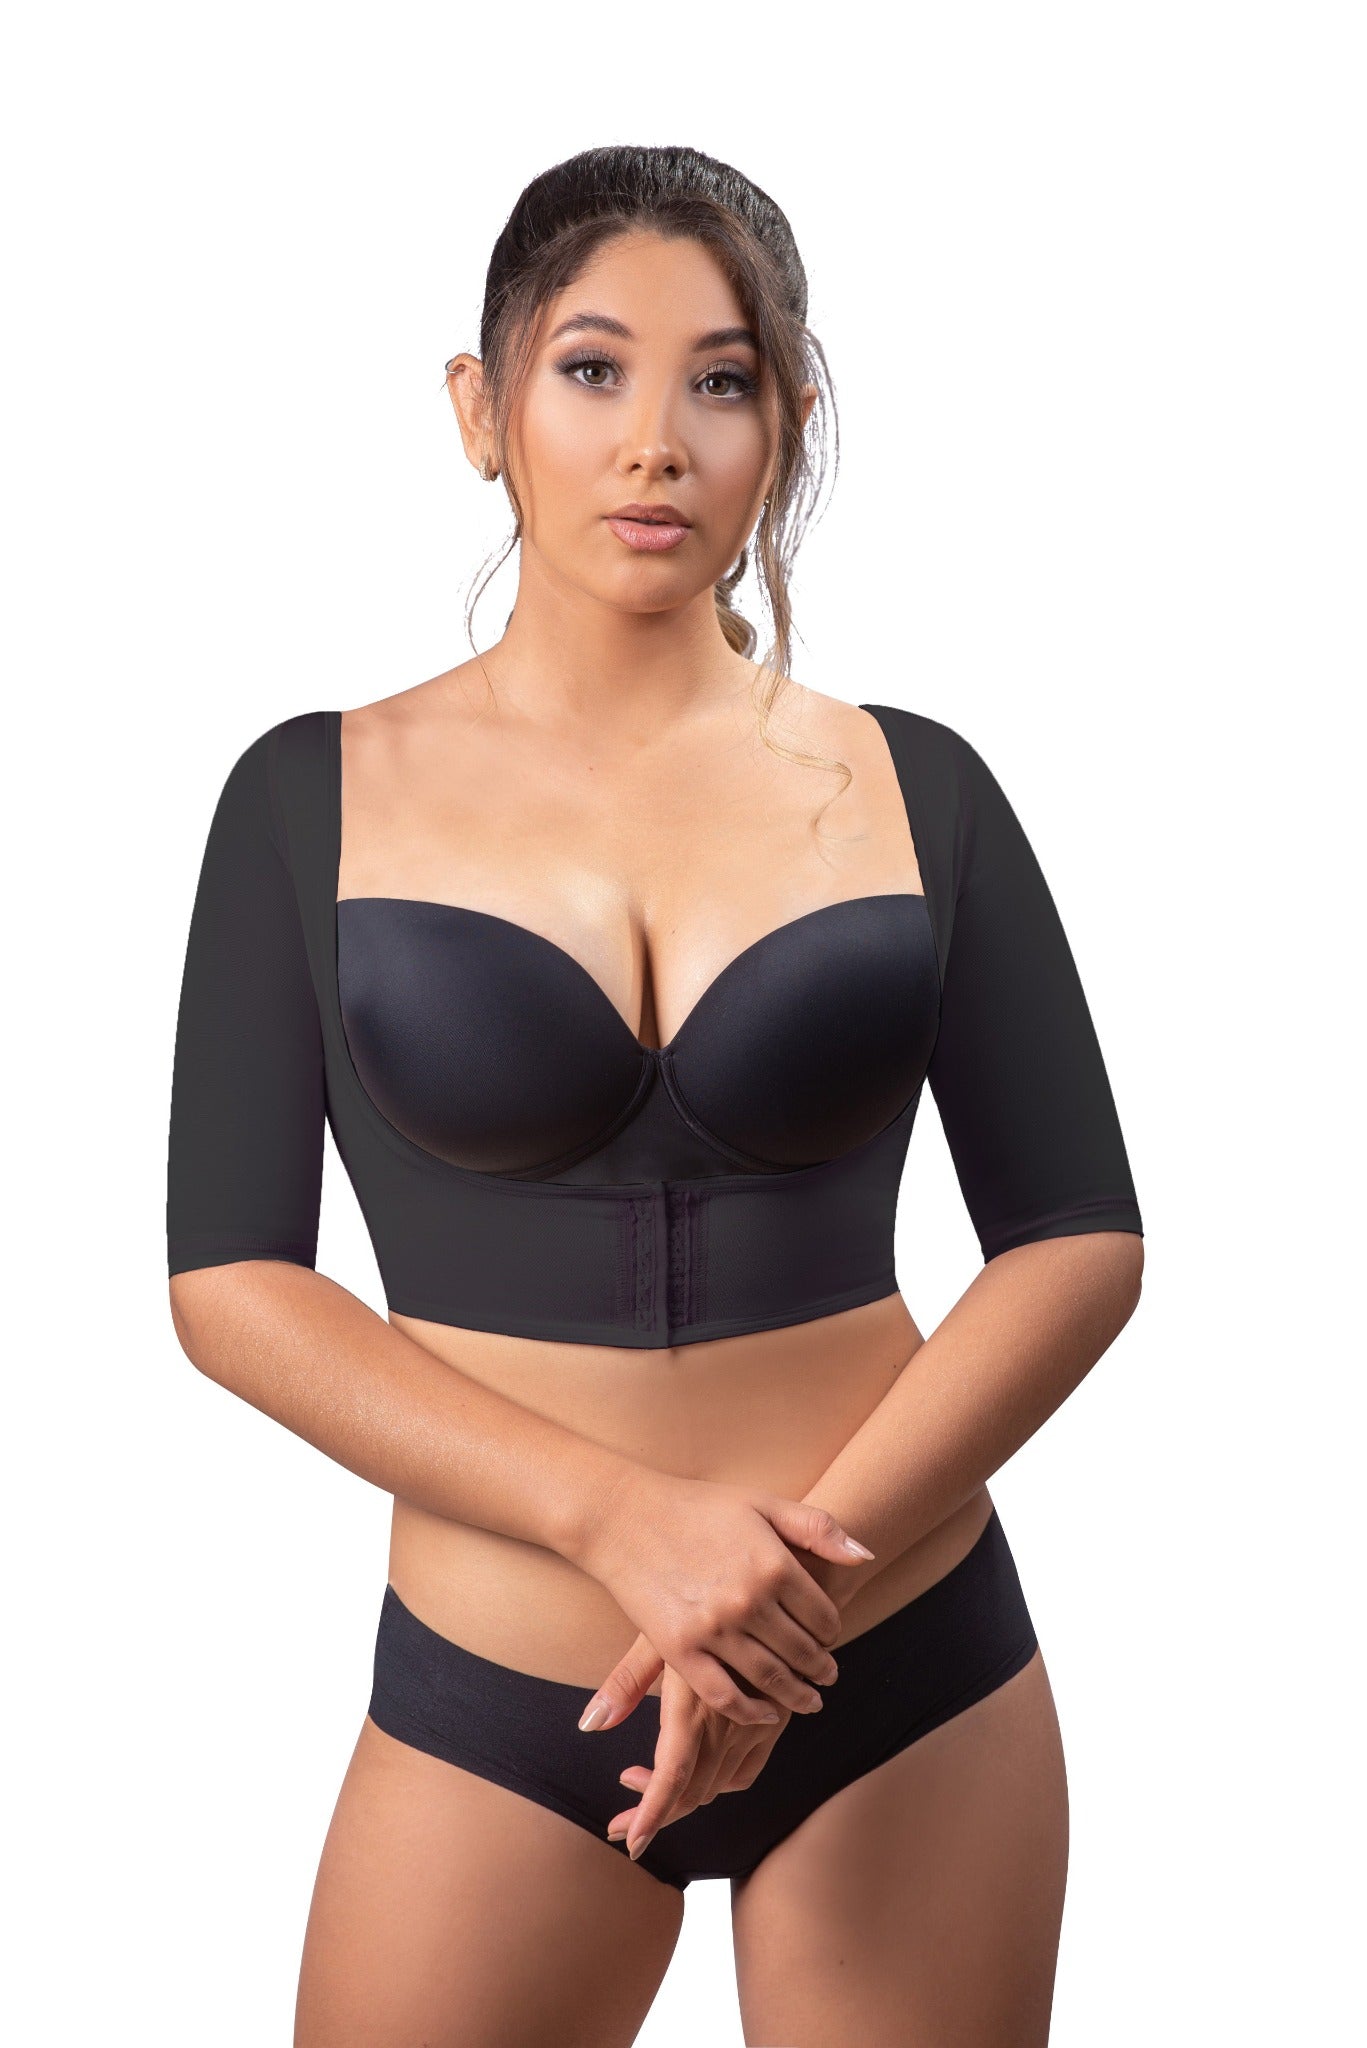 .com: vedette fajas colombianas. Skip to main content.us.  Lady  Slim Fajas Colombianas Reductoras Y Moldeadoras para Mujer Underbust Latex  Waist Trainer Hourglass Body Shaper for Women. 4.3 out of 5 stars